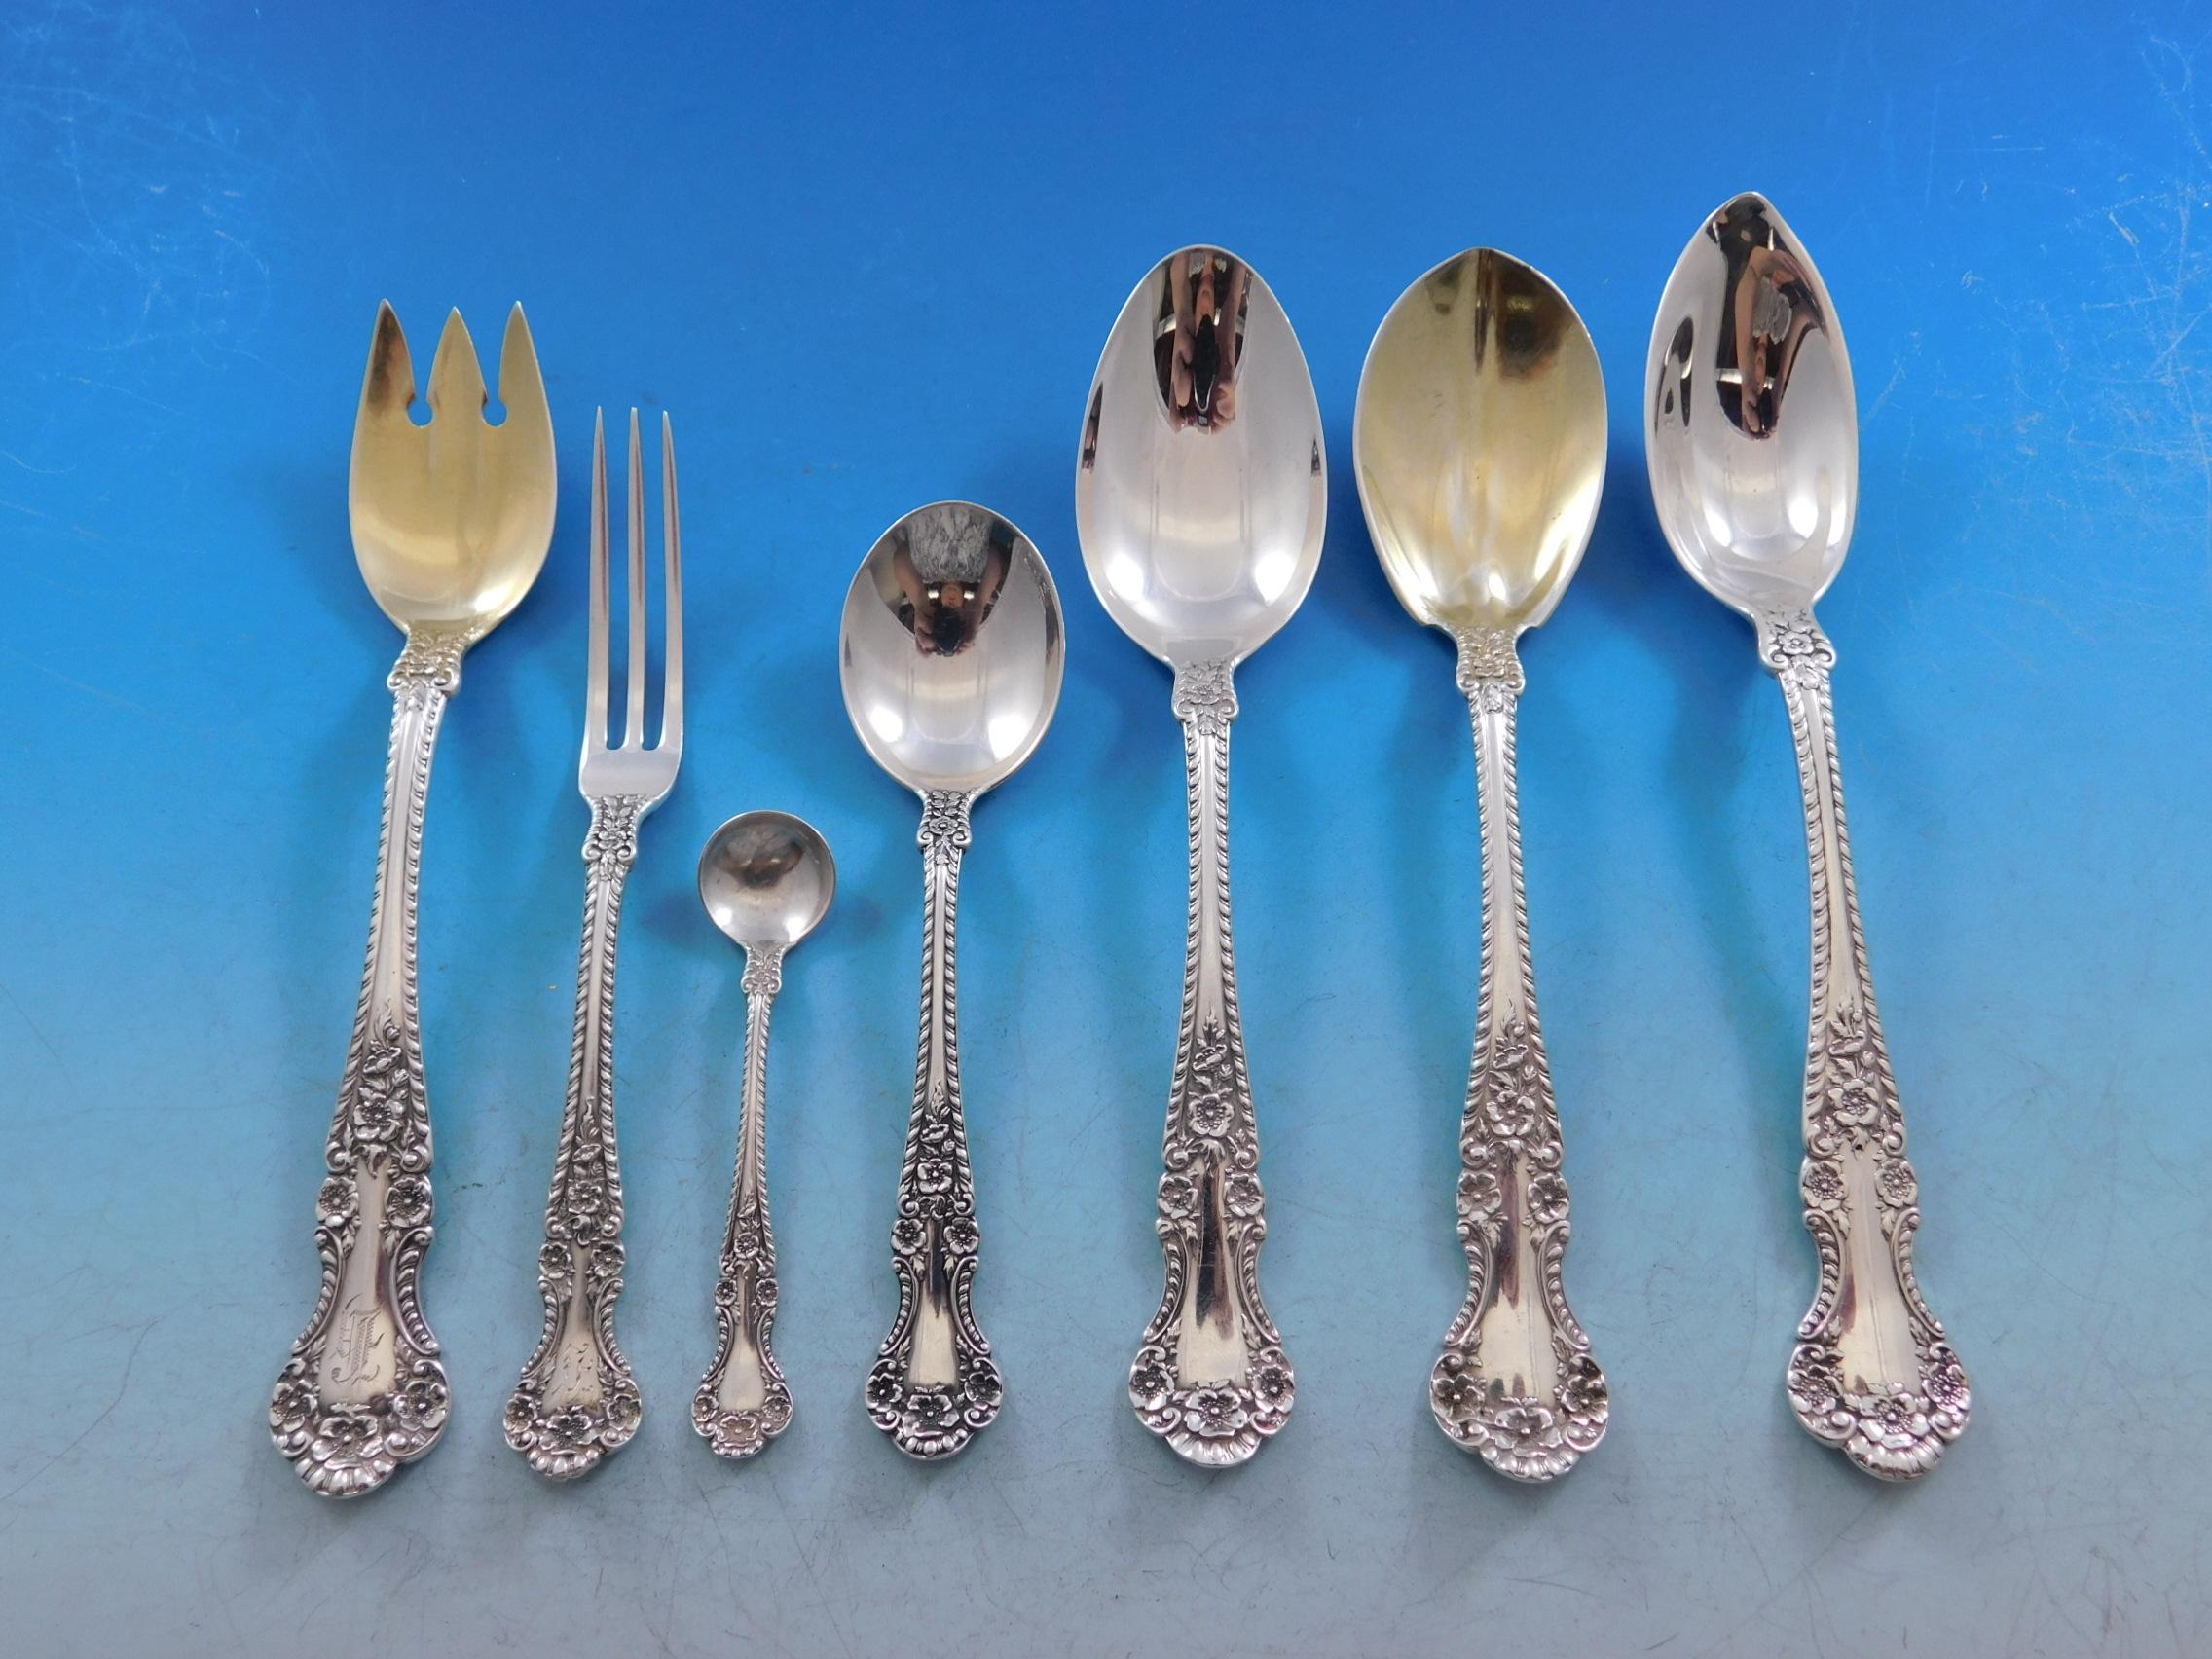 Incredible monumental Dinner and Luncheon Cambridge by Gorham sterling silver Flatware set - 310 pieces, including many unusual serving pieces. This pattern was introduced in the year 1899. This set includes:

12 dinner size knives w/blunt plated